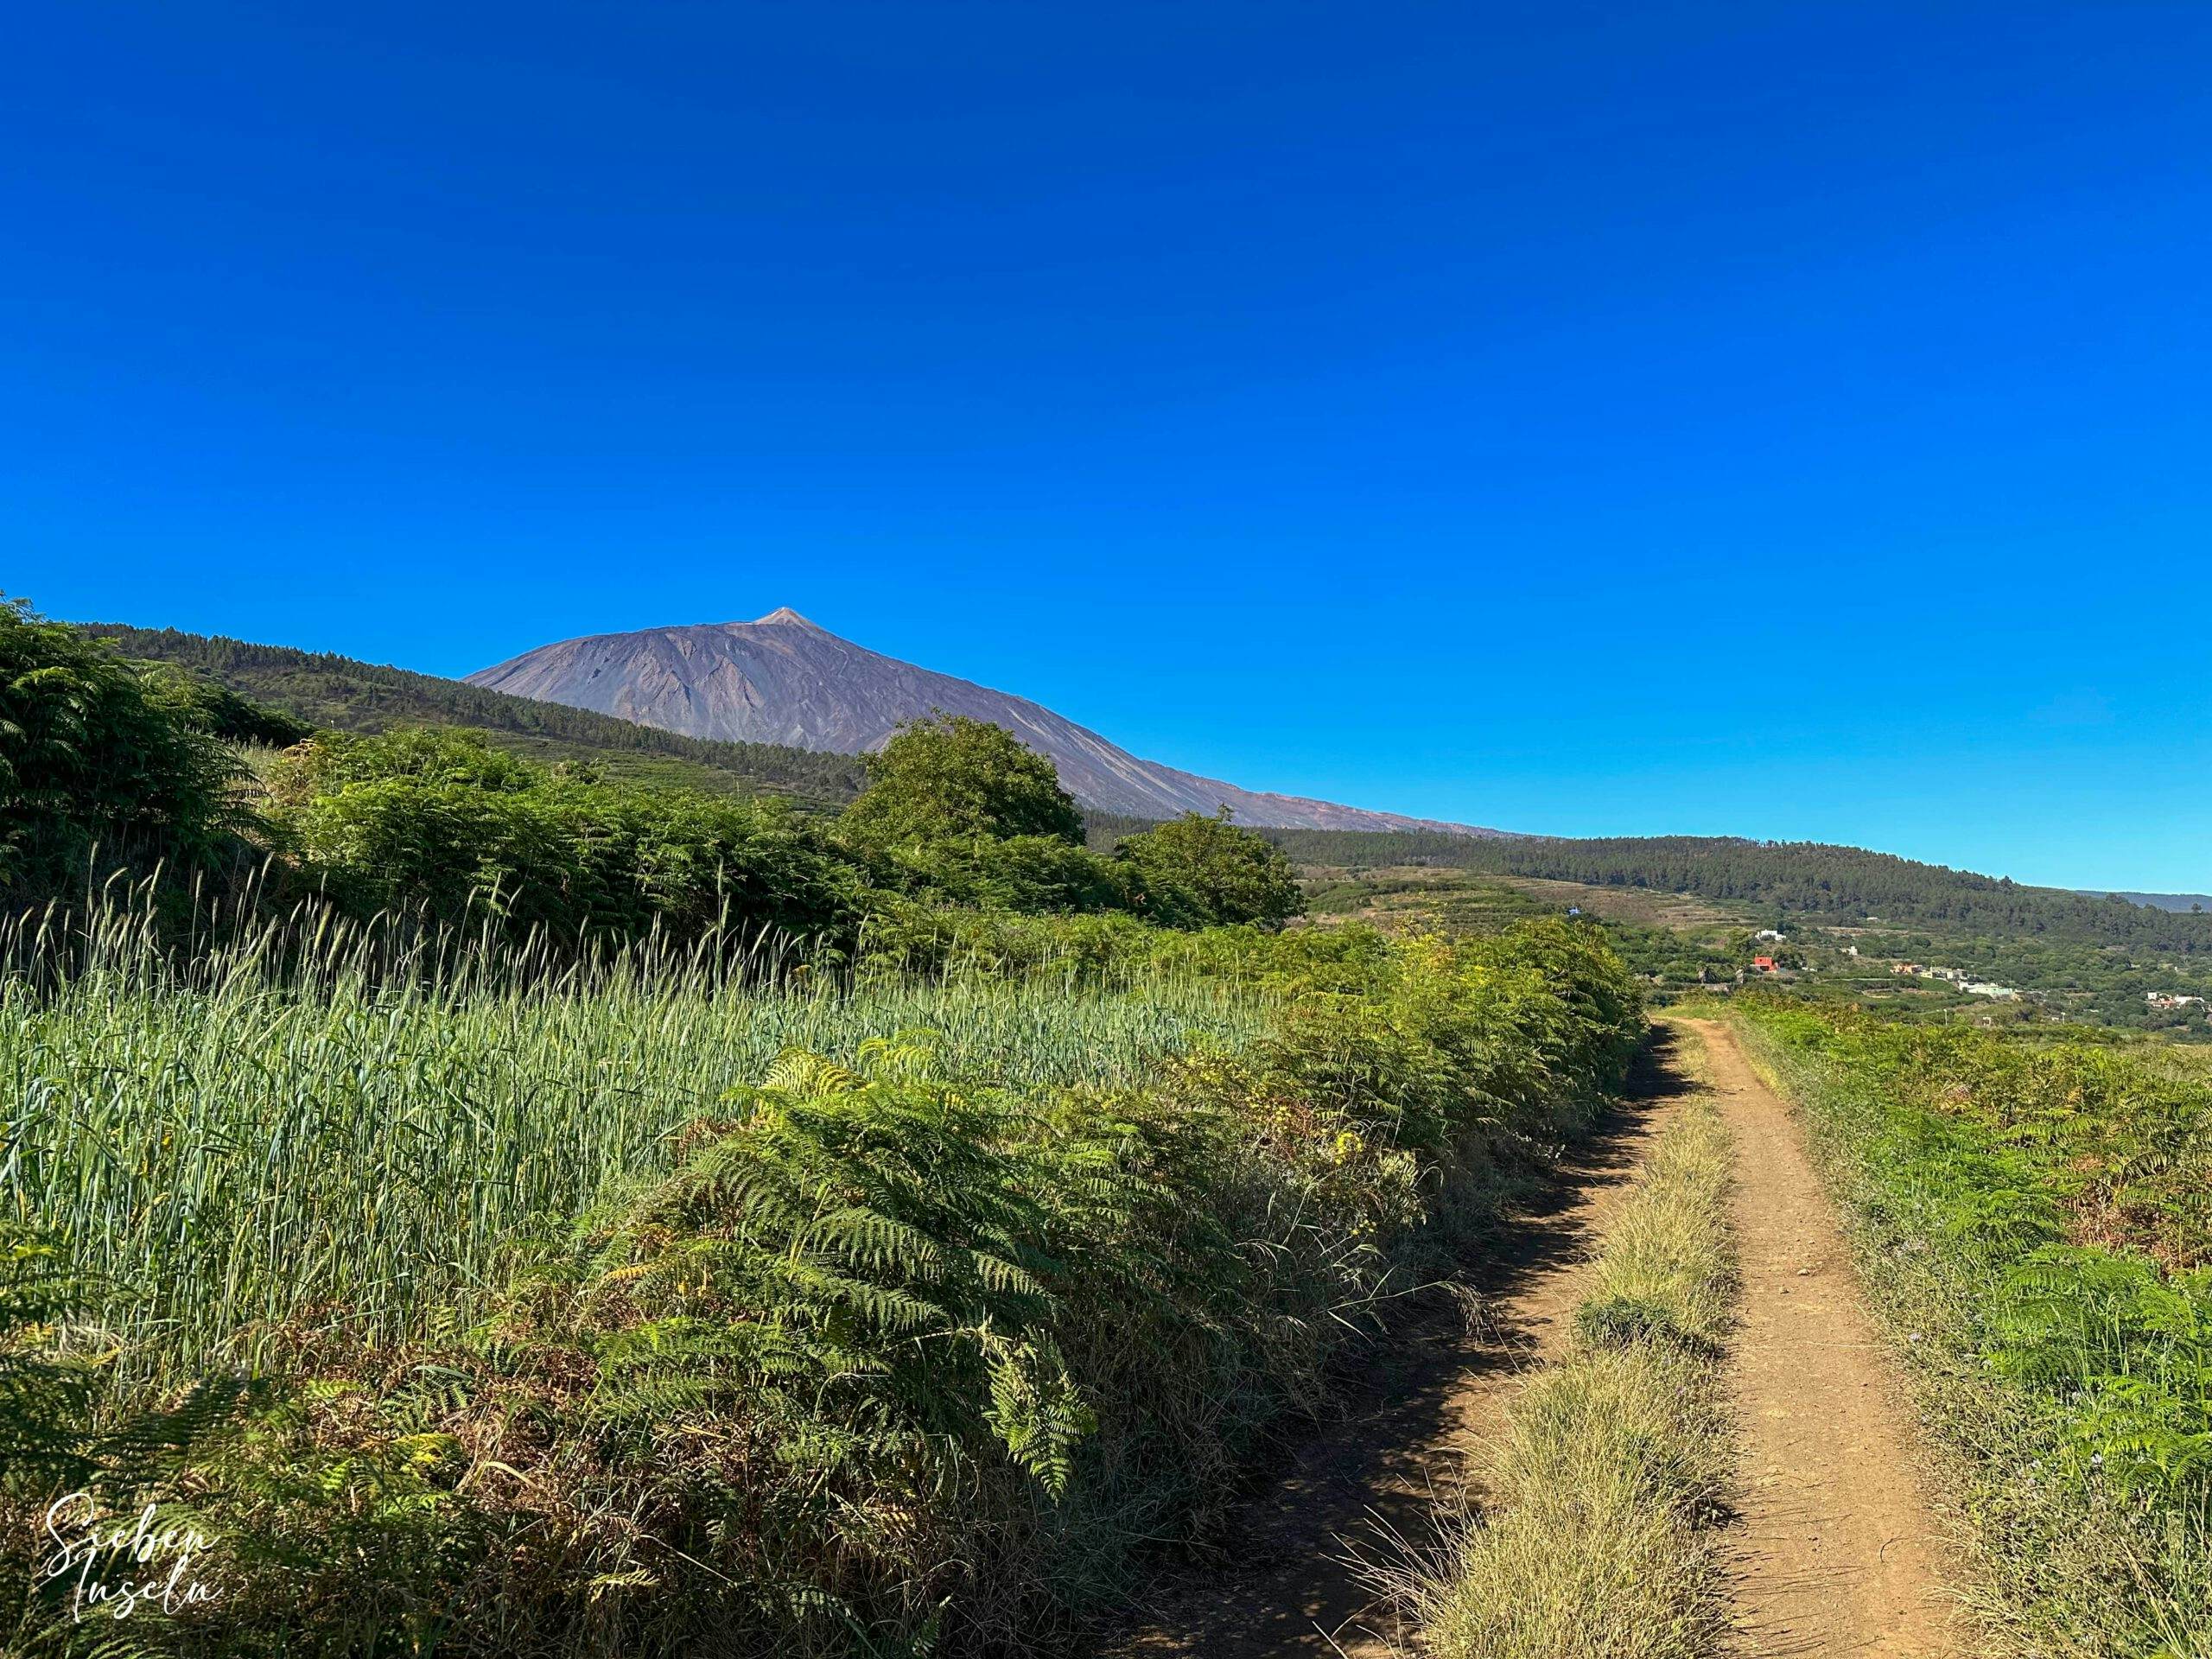 View of the Teide from the hiking trail (Jakobsweg Tenerife)